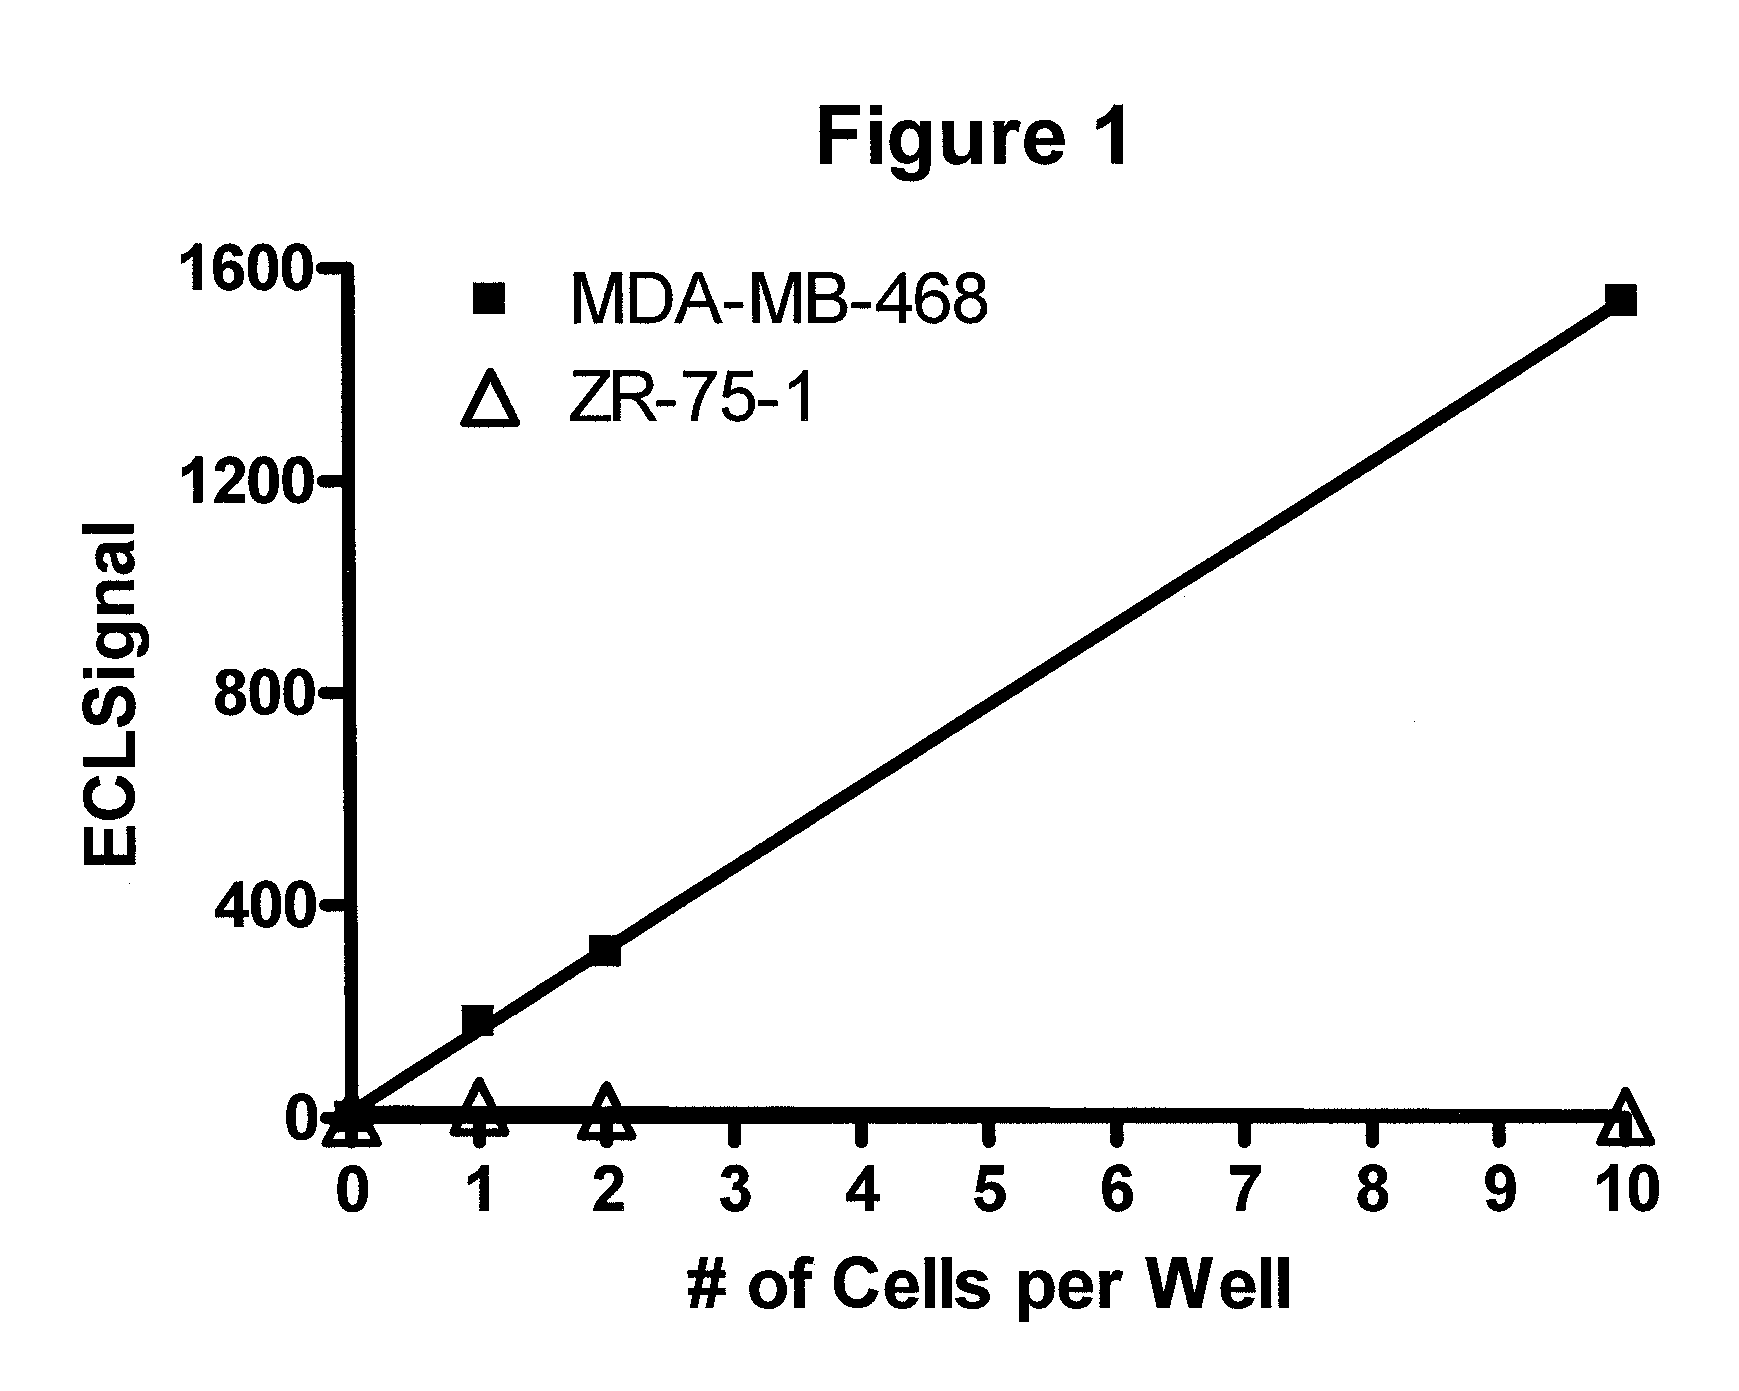 Detection of proteins from circulating neoplastic cells